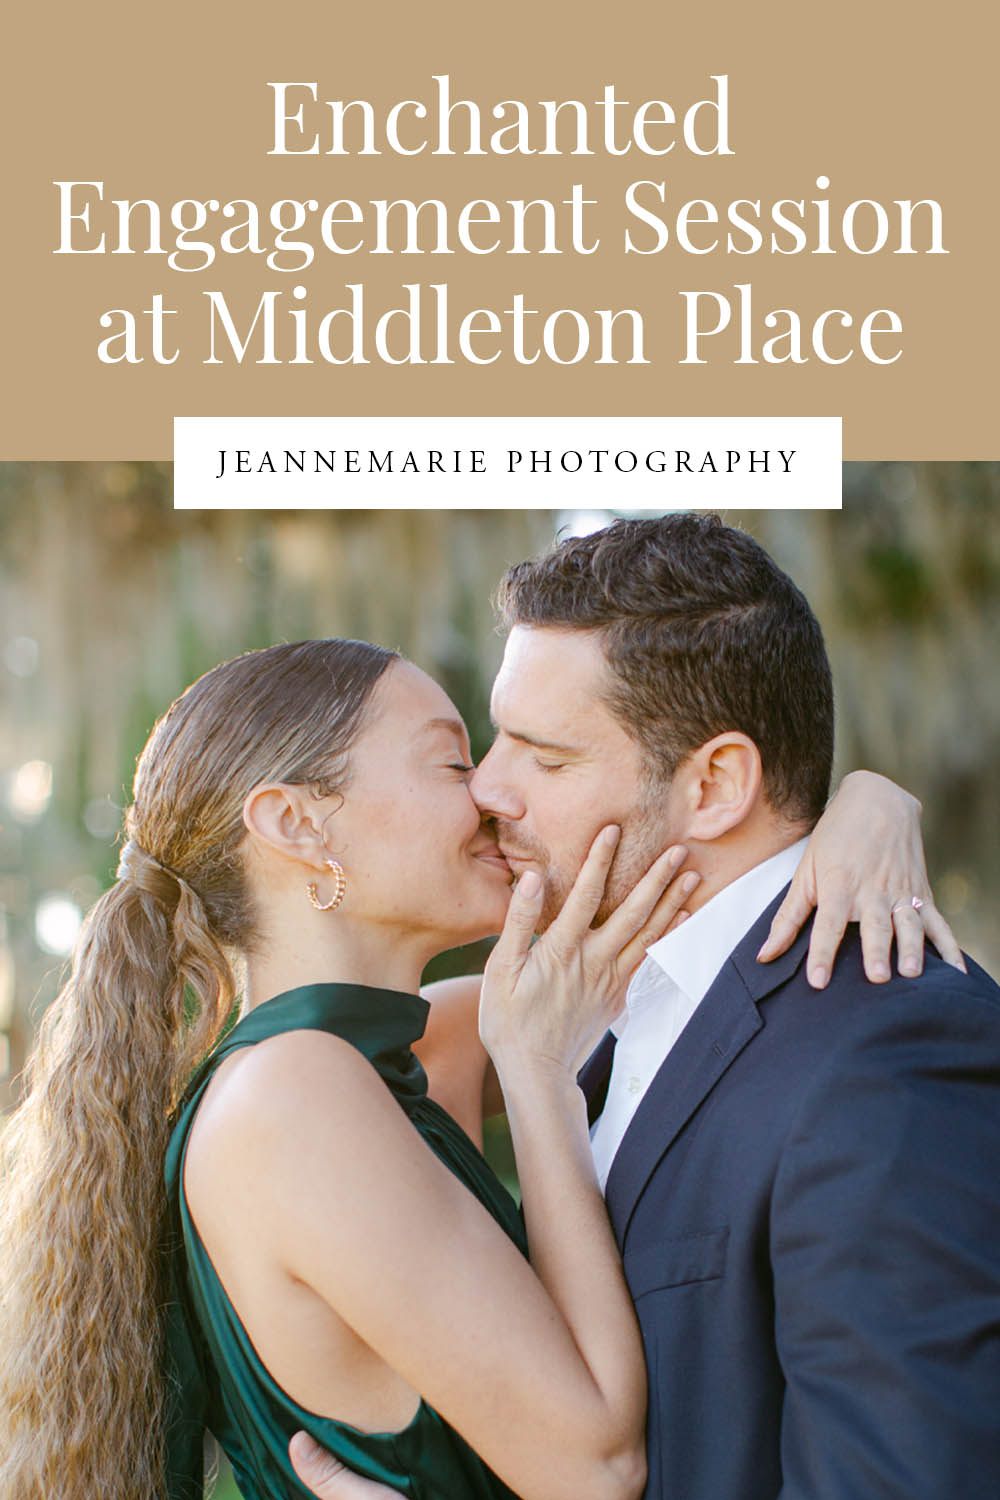 Engagement Session at Middleton Place, couple photos at middleton place charleston